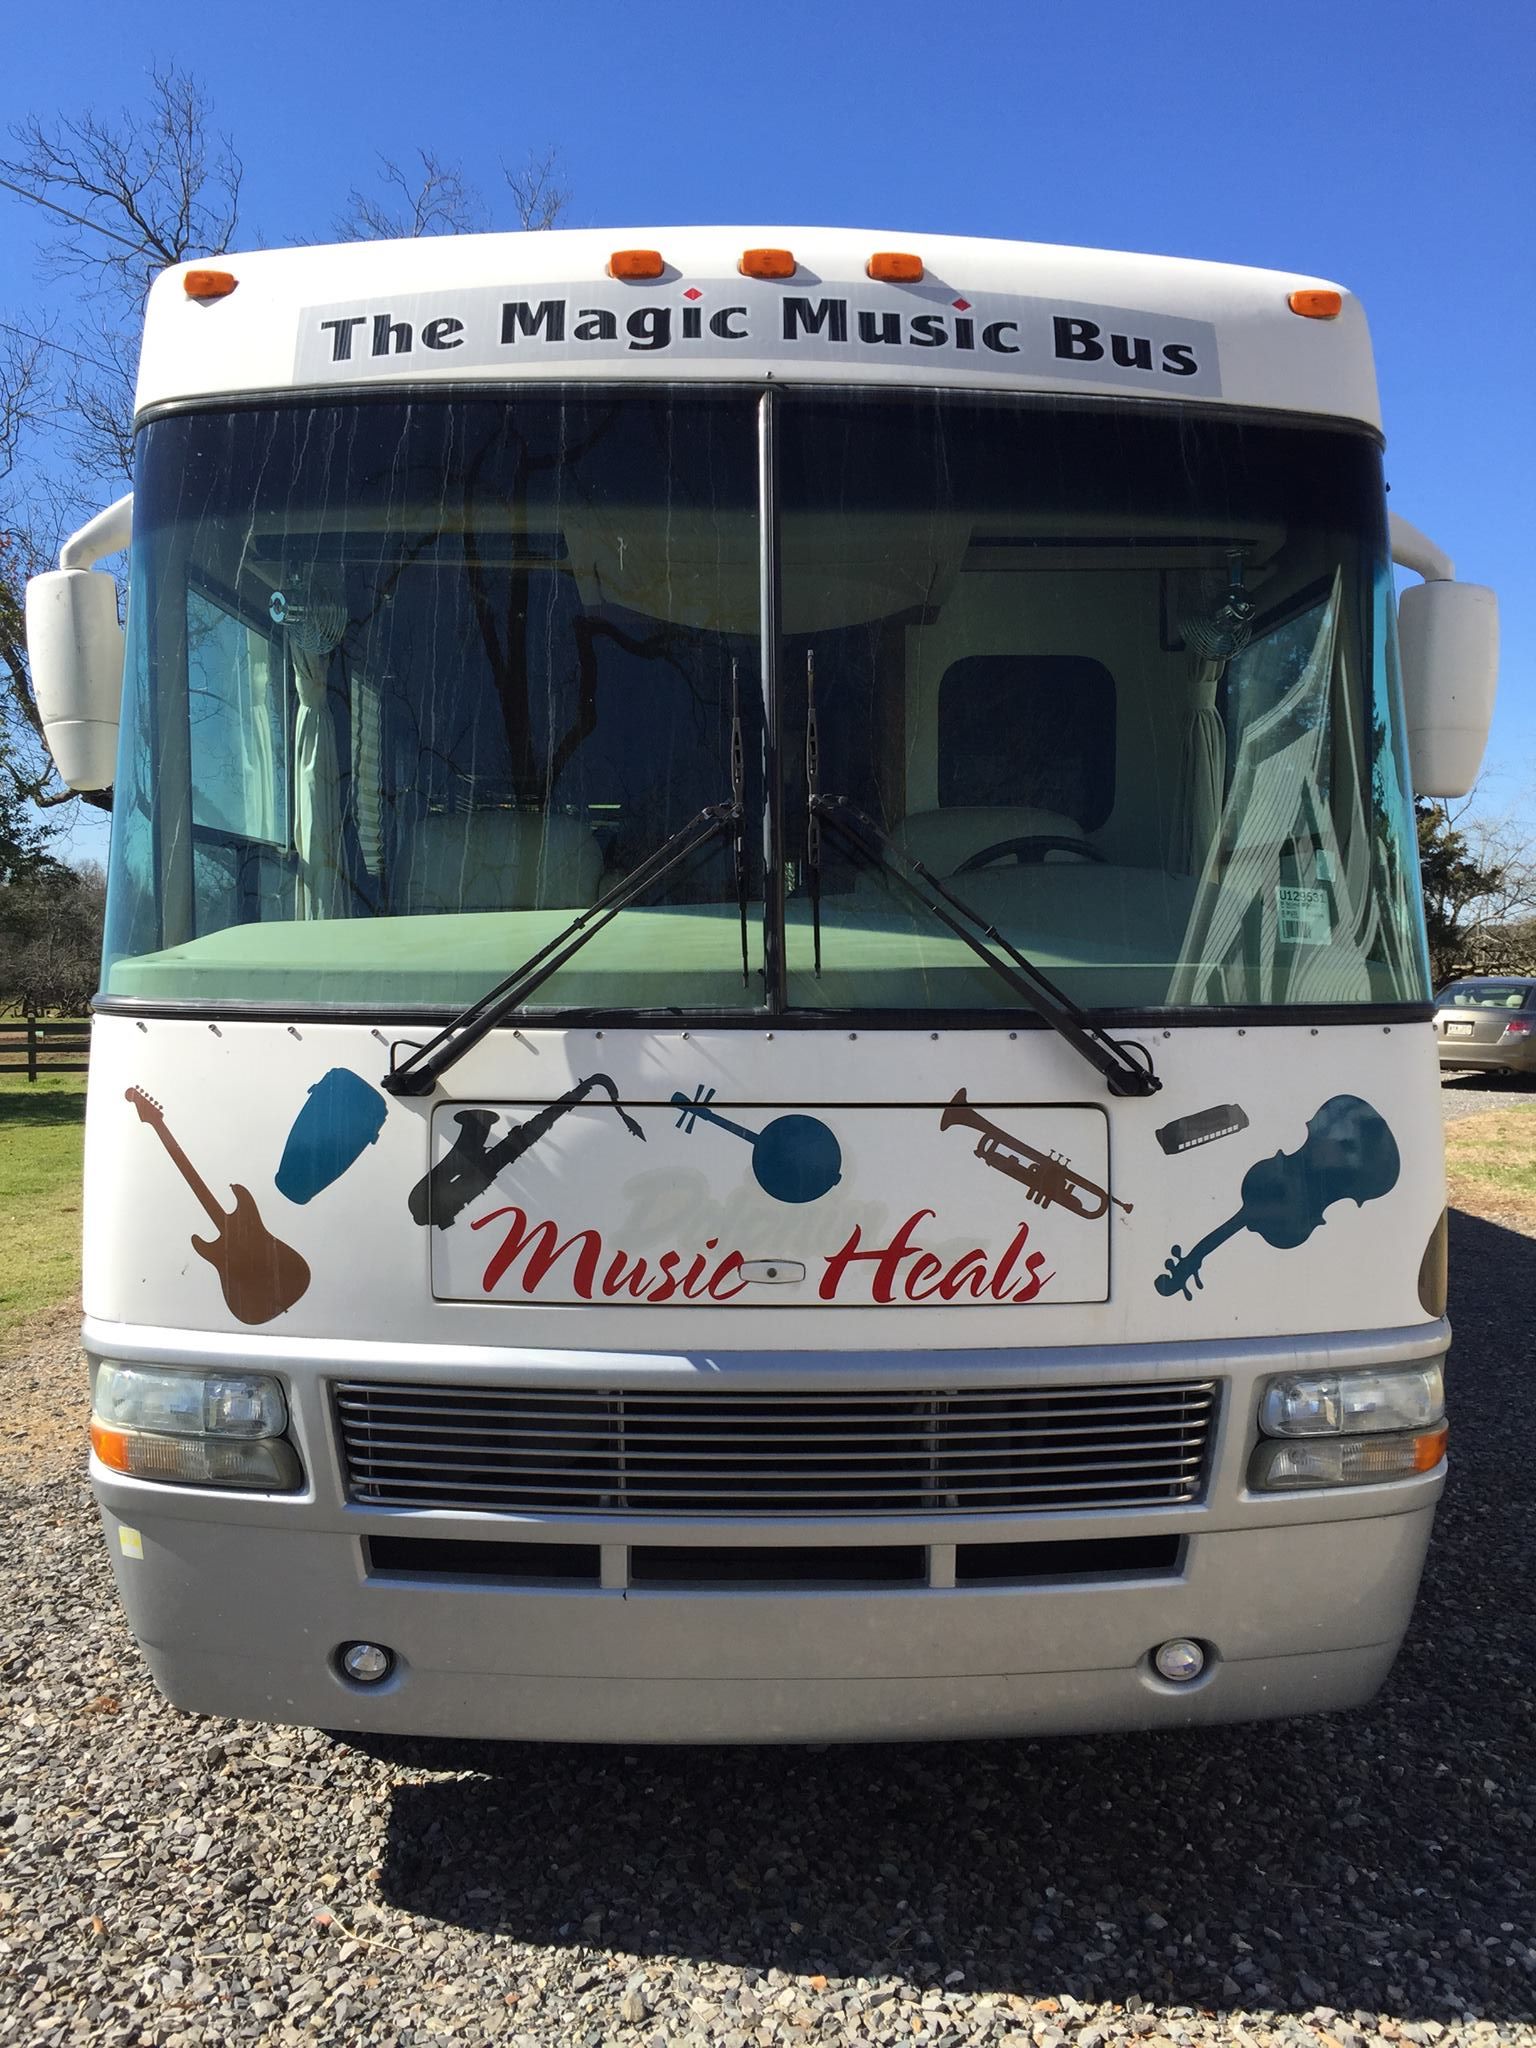 The Hungry for Music RV, a.k.a. the Magic Music Bus, is traveling the United States to share its mission.